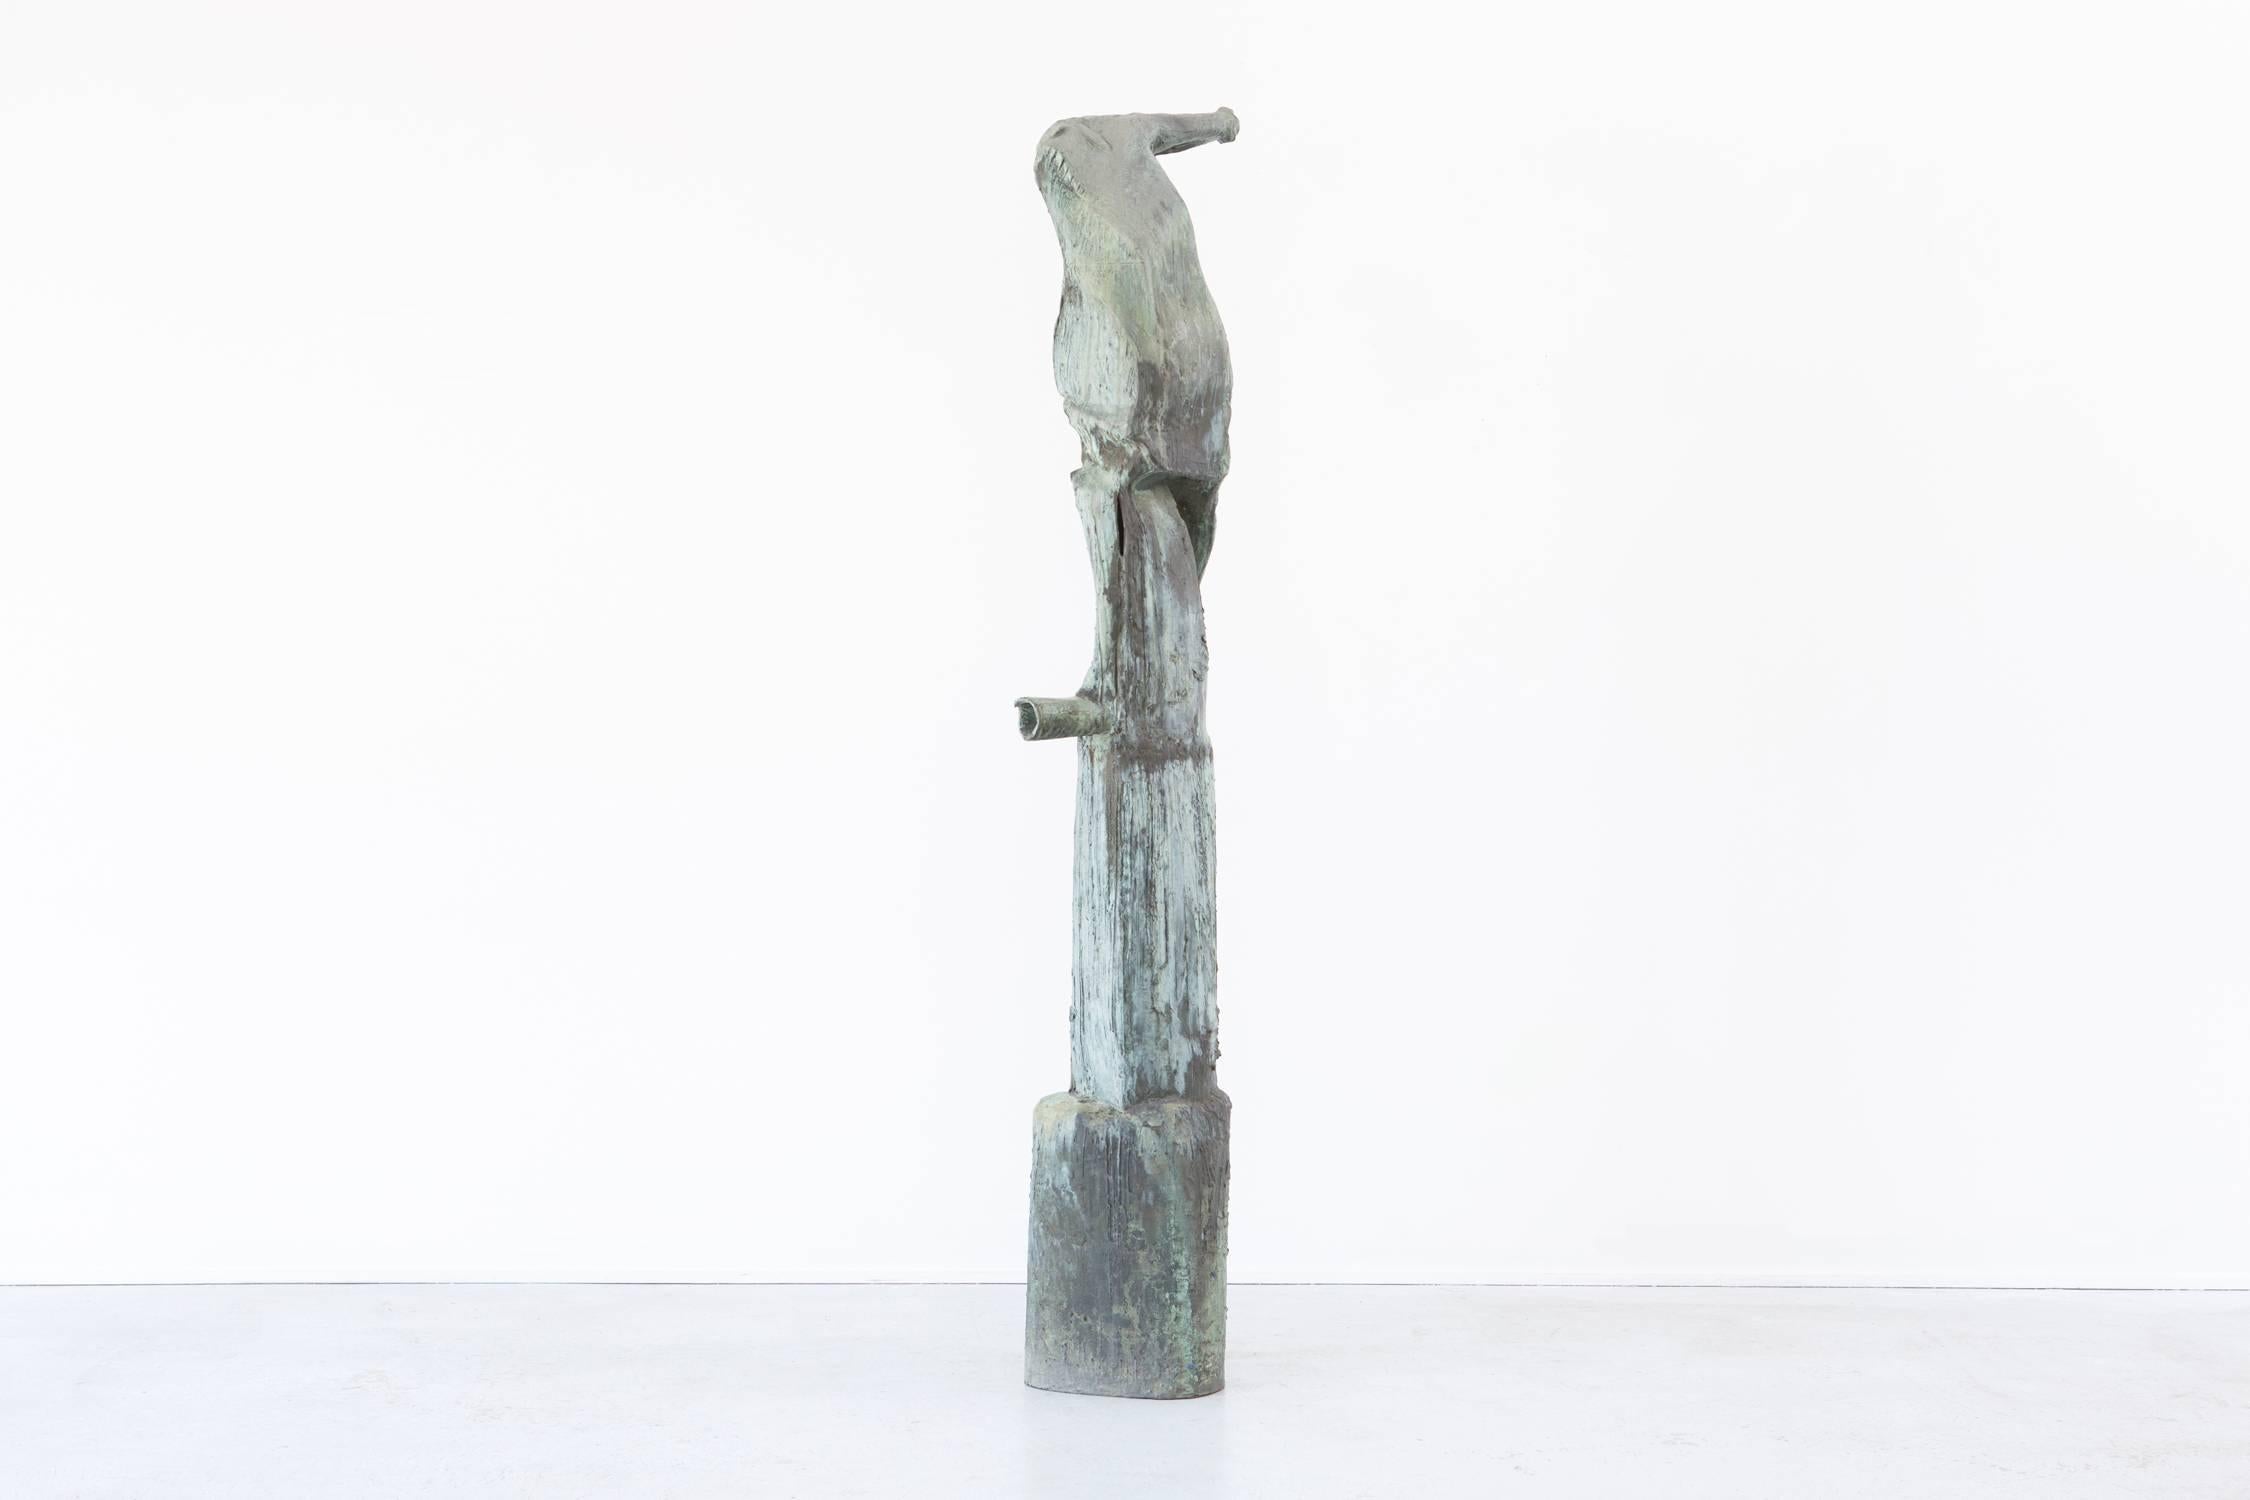 Obscure 1960's Stan Mock bronze brutalist style sculpture.  The patinated bronze has an amazing finish to it.  Great as a standalone statement piece.
 
Stan Mock,

USA, circa 1965.

Patinated bronze.

Measure: 73" H x 14 ½" W x 14 ½"